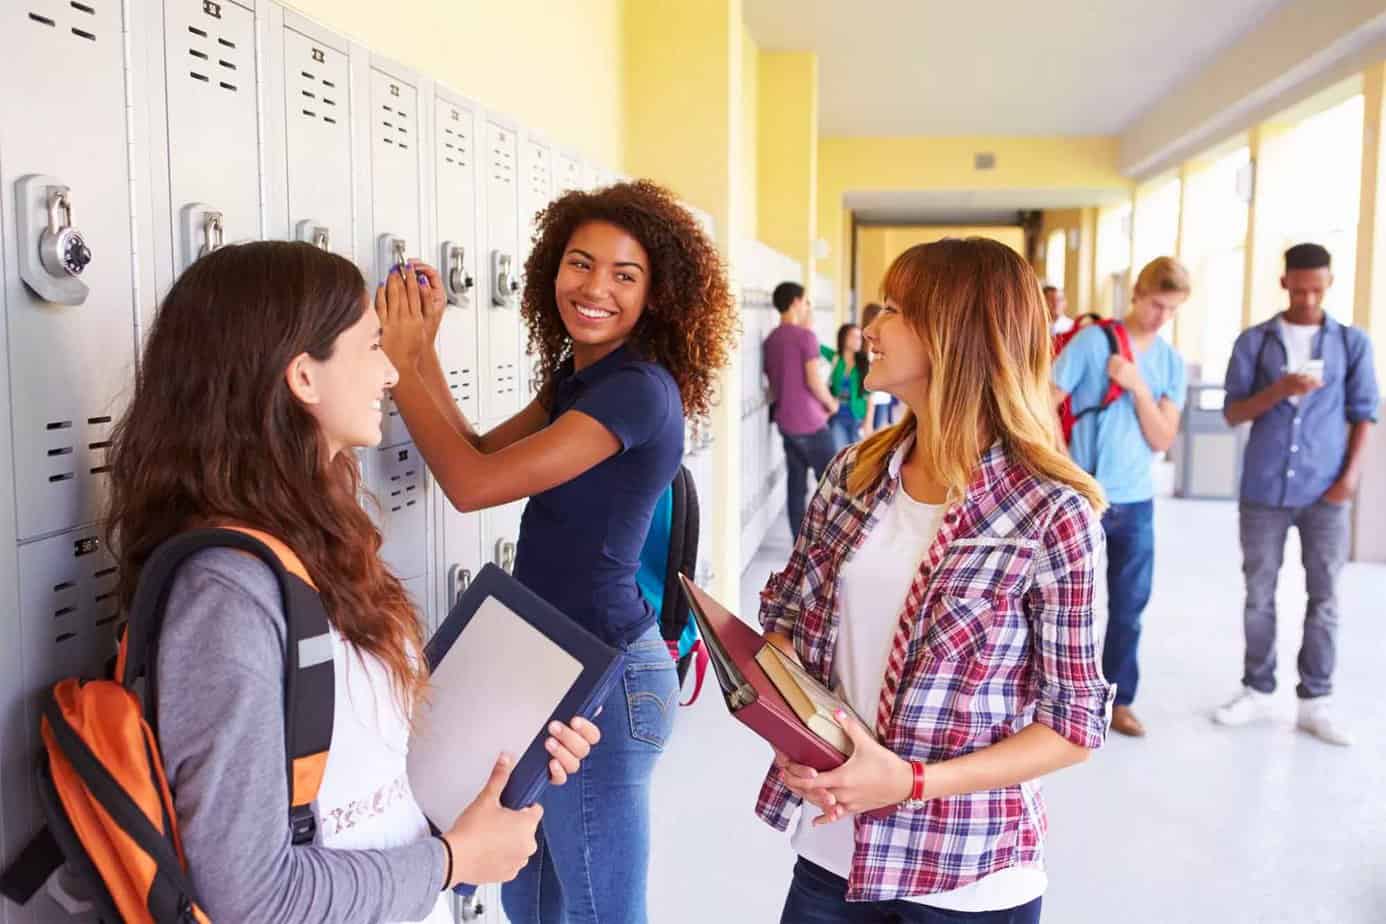 A photo of three teenage girls talking and smiling by lockers at school.